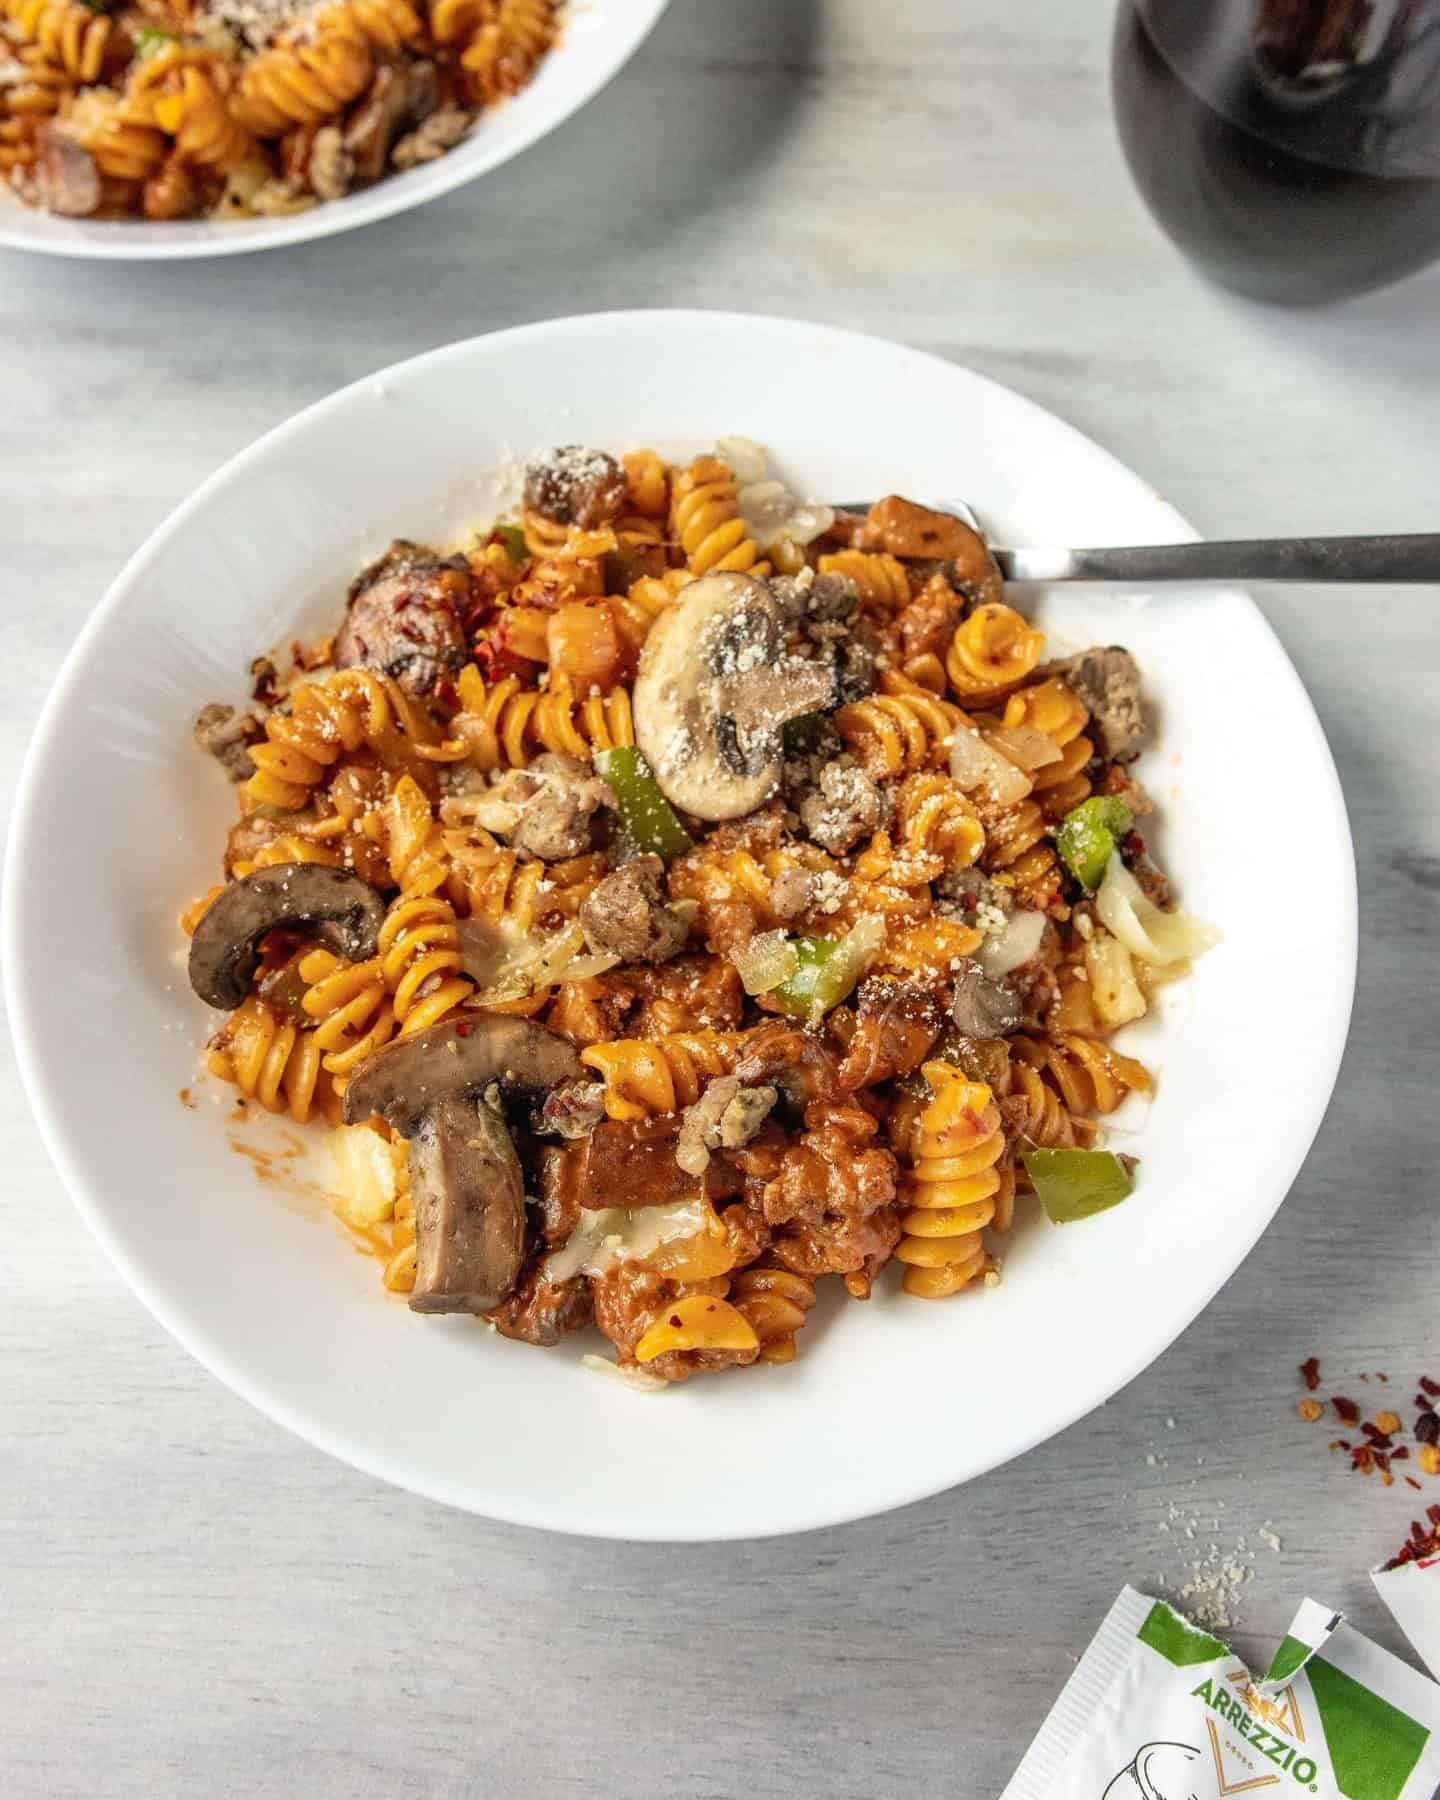 This One Pot Pizza Pasta only takes 30 minutes, so it’s is perfect for a busy weeknight. ⁣
⁣
It’s very easy to customize, so everyone in the family can fall in love with this easy dinner. ⁣
⁣
Recipe in the bio!🍕🍝⁣
⁣
#easyrecipes #food52 #todayfood #quickdinner #dinnerideas #pastadinner #pastarecipe #onepot #pasta #meganvskitchen  #thekitchn #buzzfeedfood #feedfeed #bhgfood